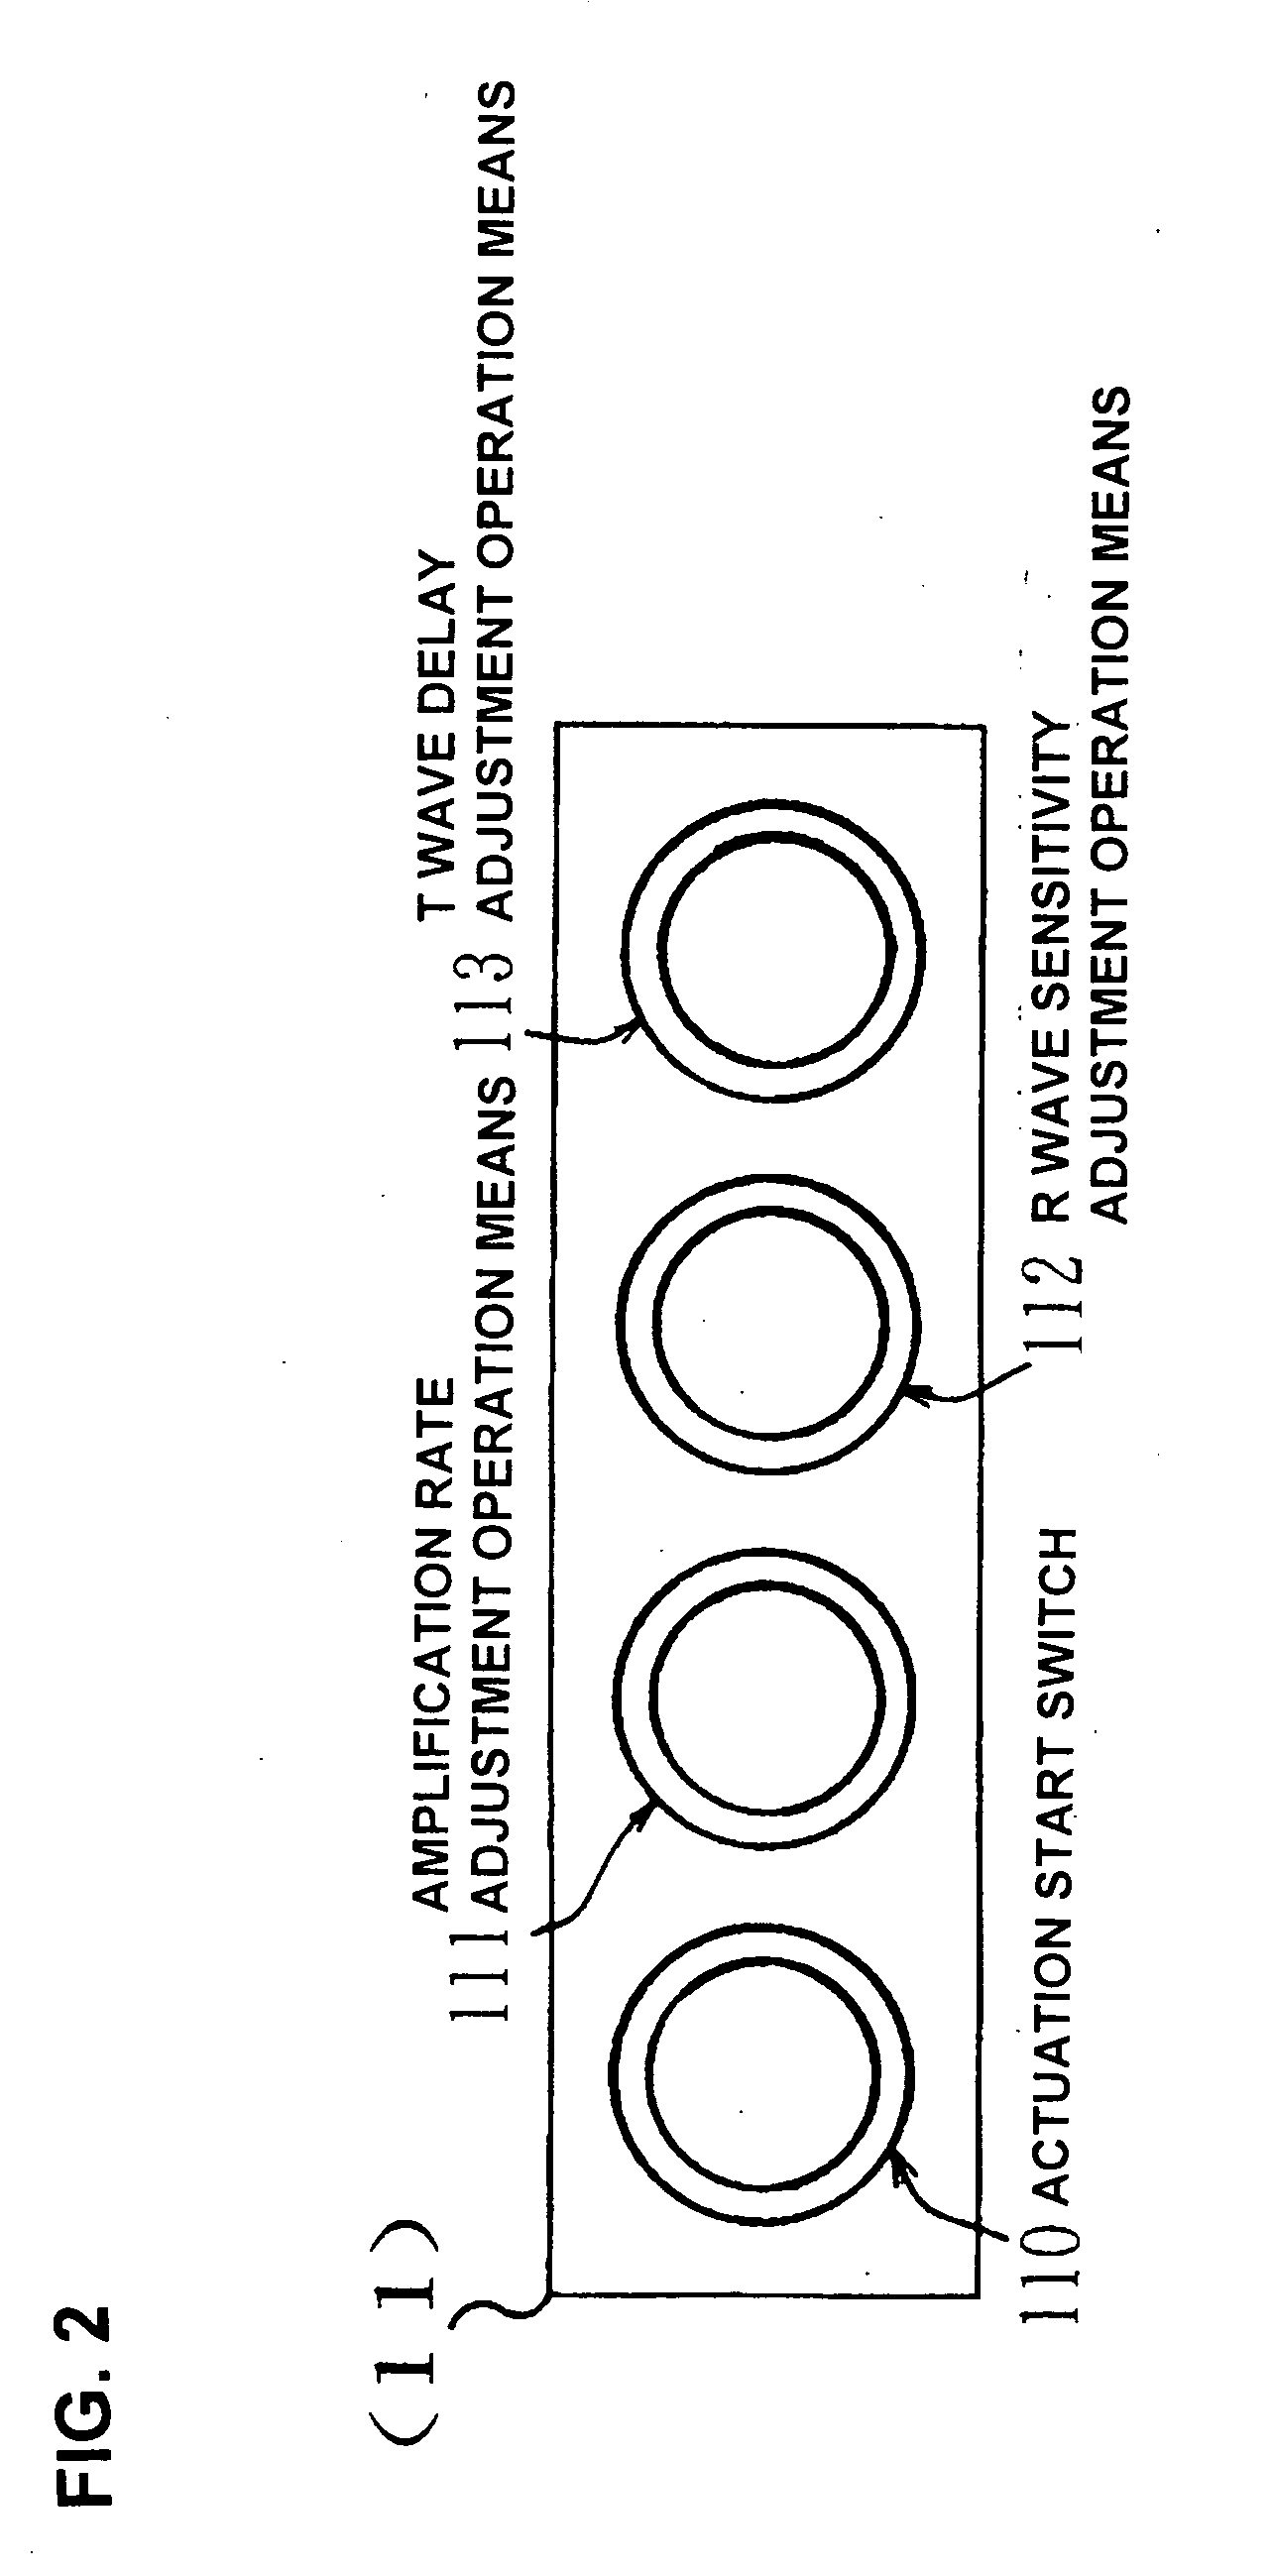 Pulsation-type auxiliary circulation system, pulsatile flow generation control device, and pulsatile flow generation control method